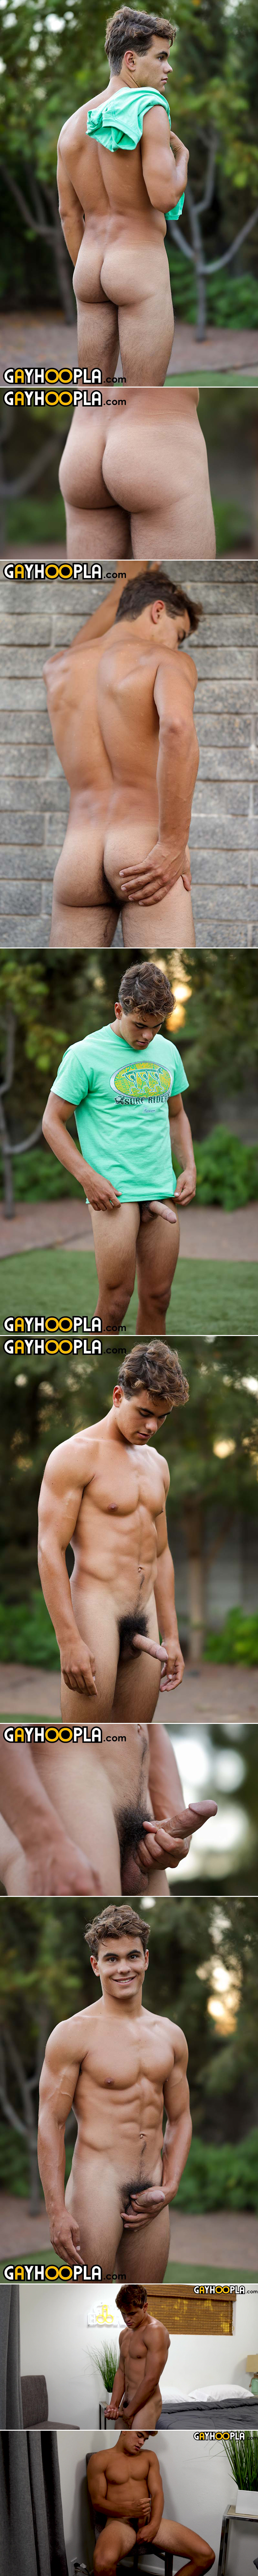 Carter Smith Leaves Us Drooling at GayHoopla